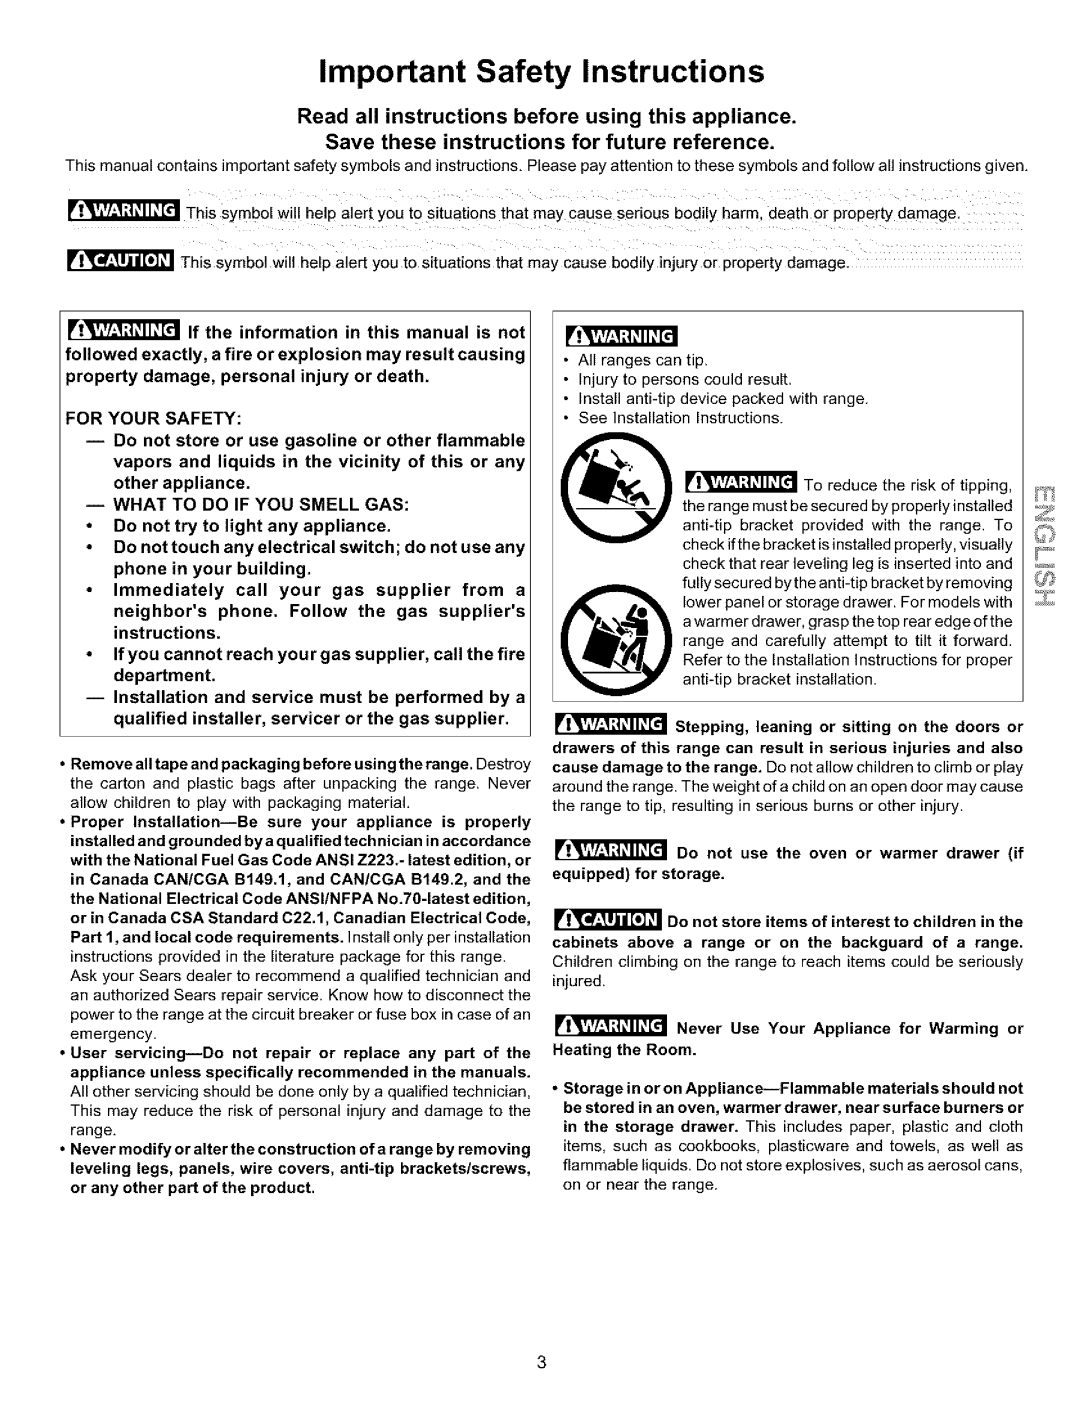 Kenmore 970-334420 manual Important Safety Instructions, Read all instructions before using this appliance, For Your Safety 